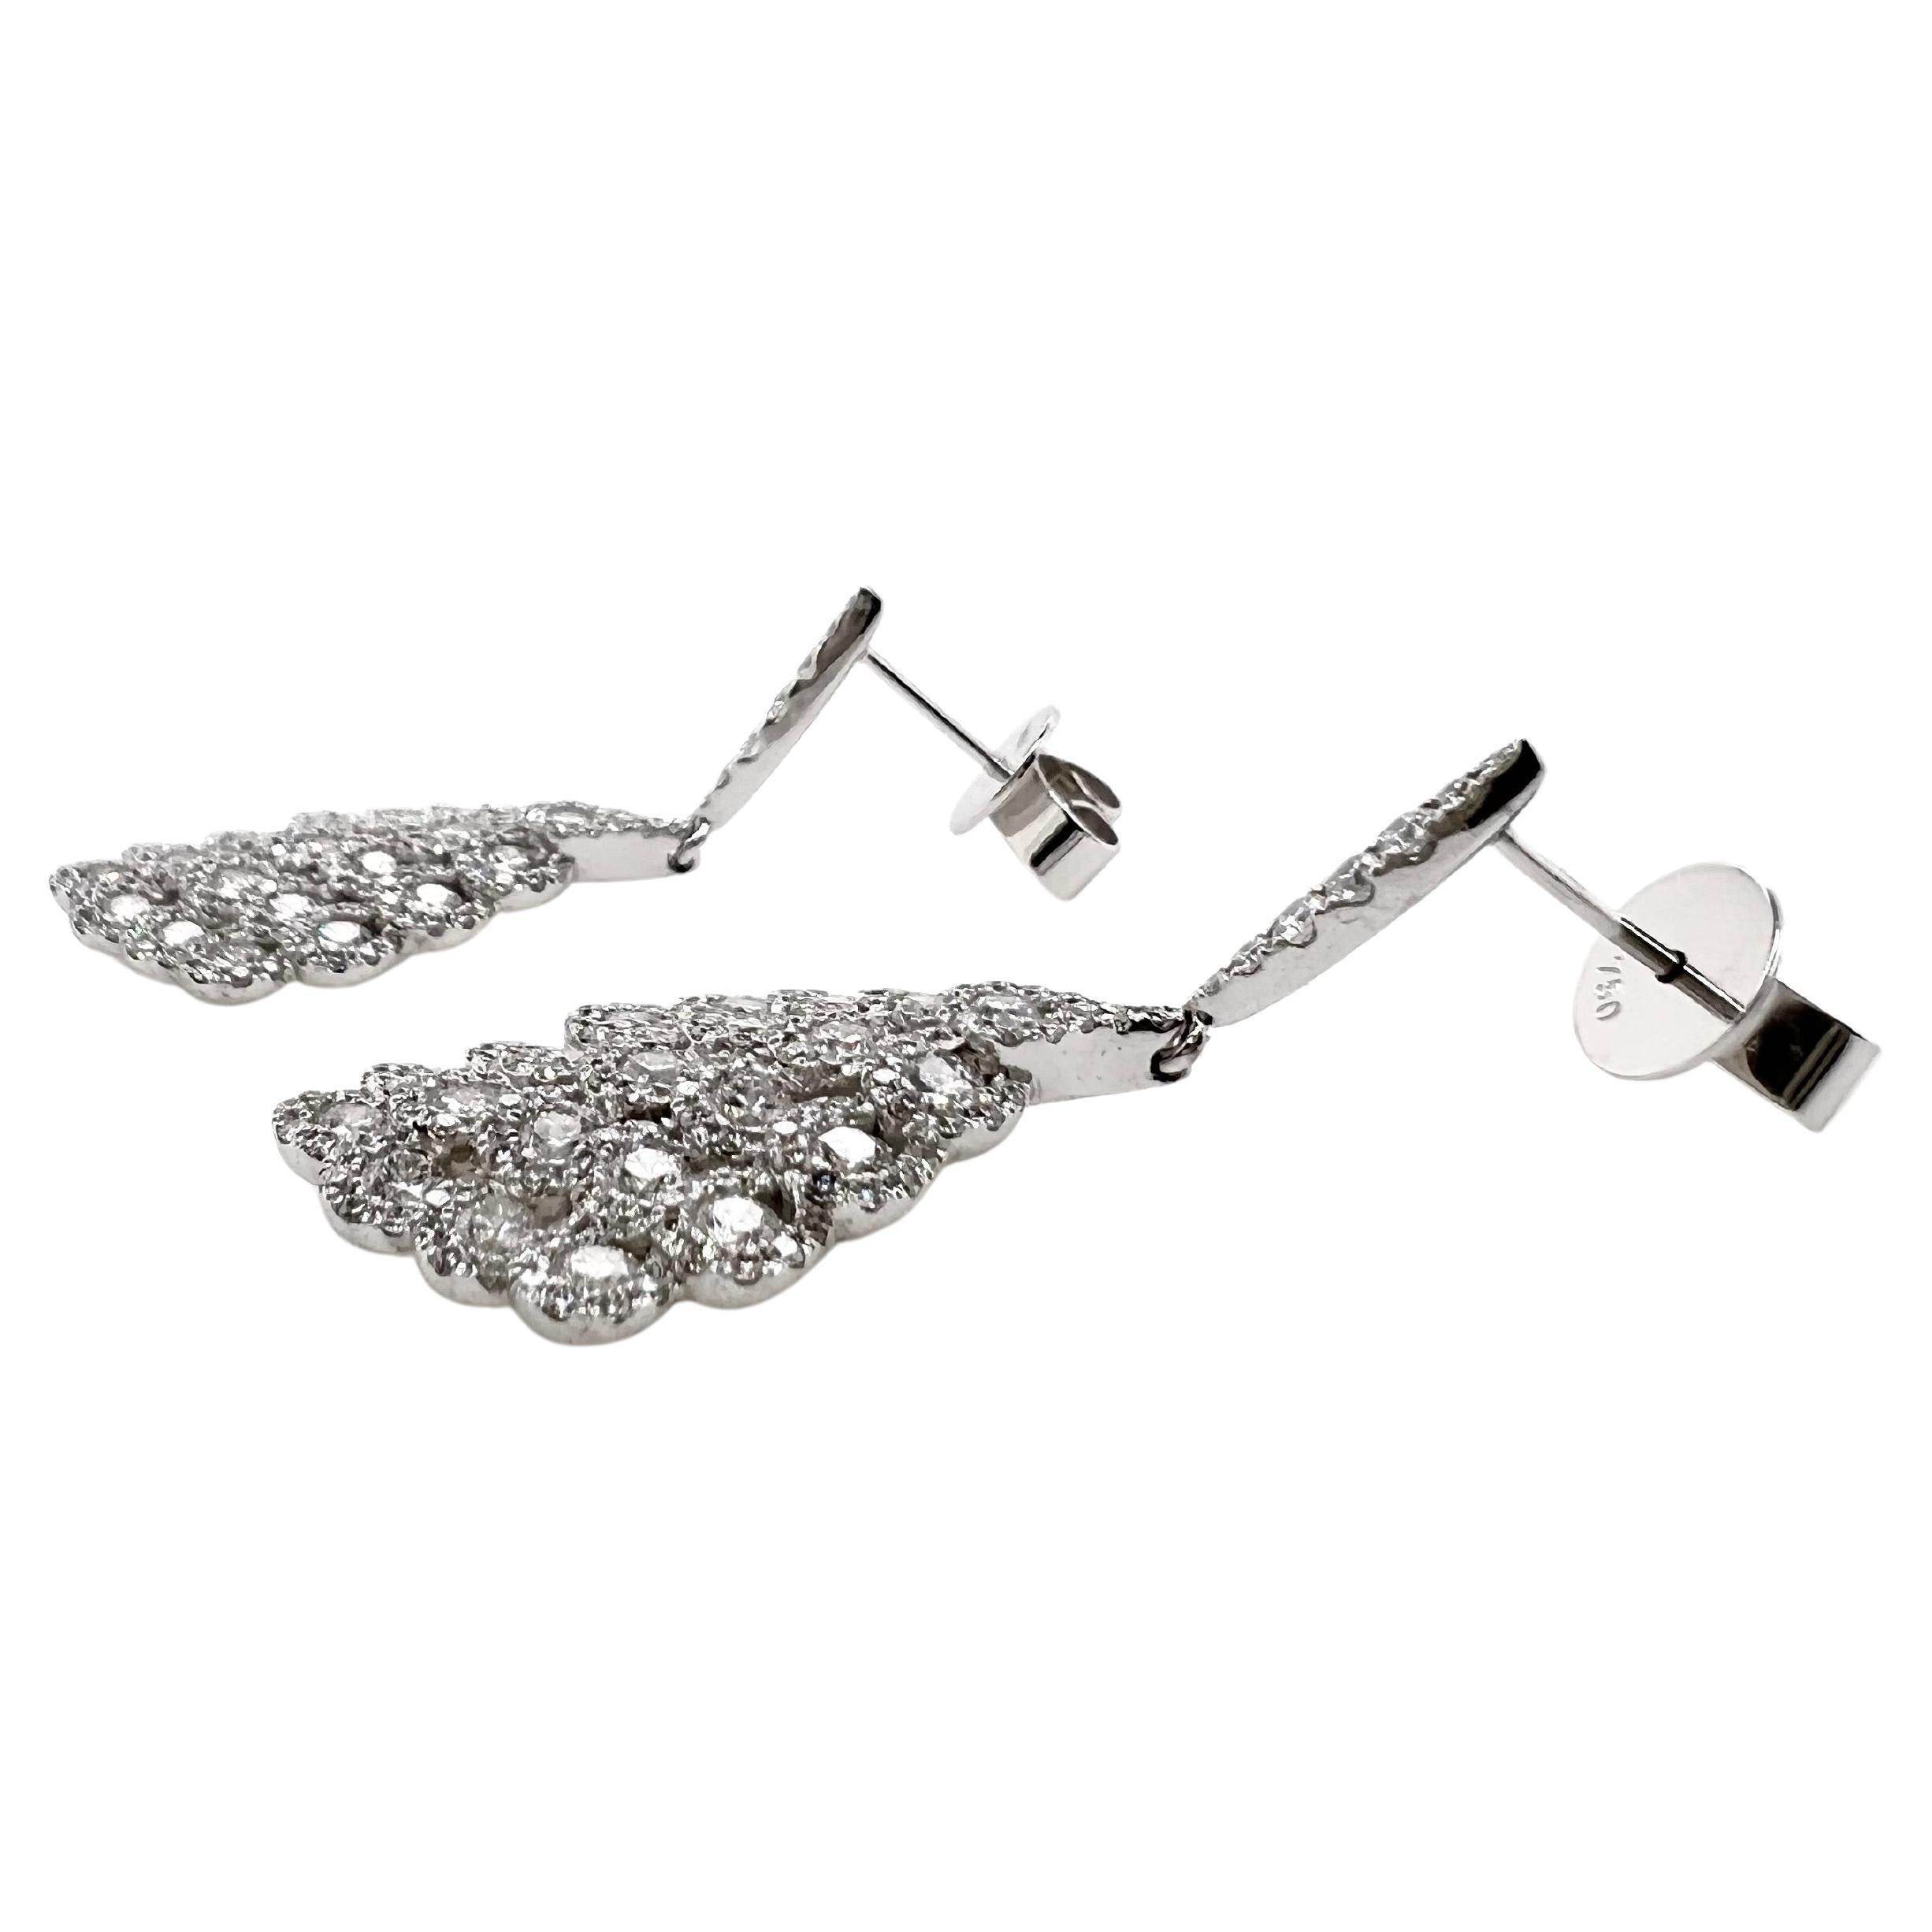 These absolute fabulous dangling earrings are set in 18k white gold  with a honeycomb motif that is eye catching.  The amazing craftsmanship is evident and these earrings will get everyone's attentions!


Diamonds: 4.22, Round Brilliant
Metal: 18k